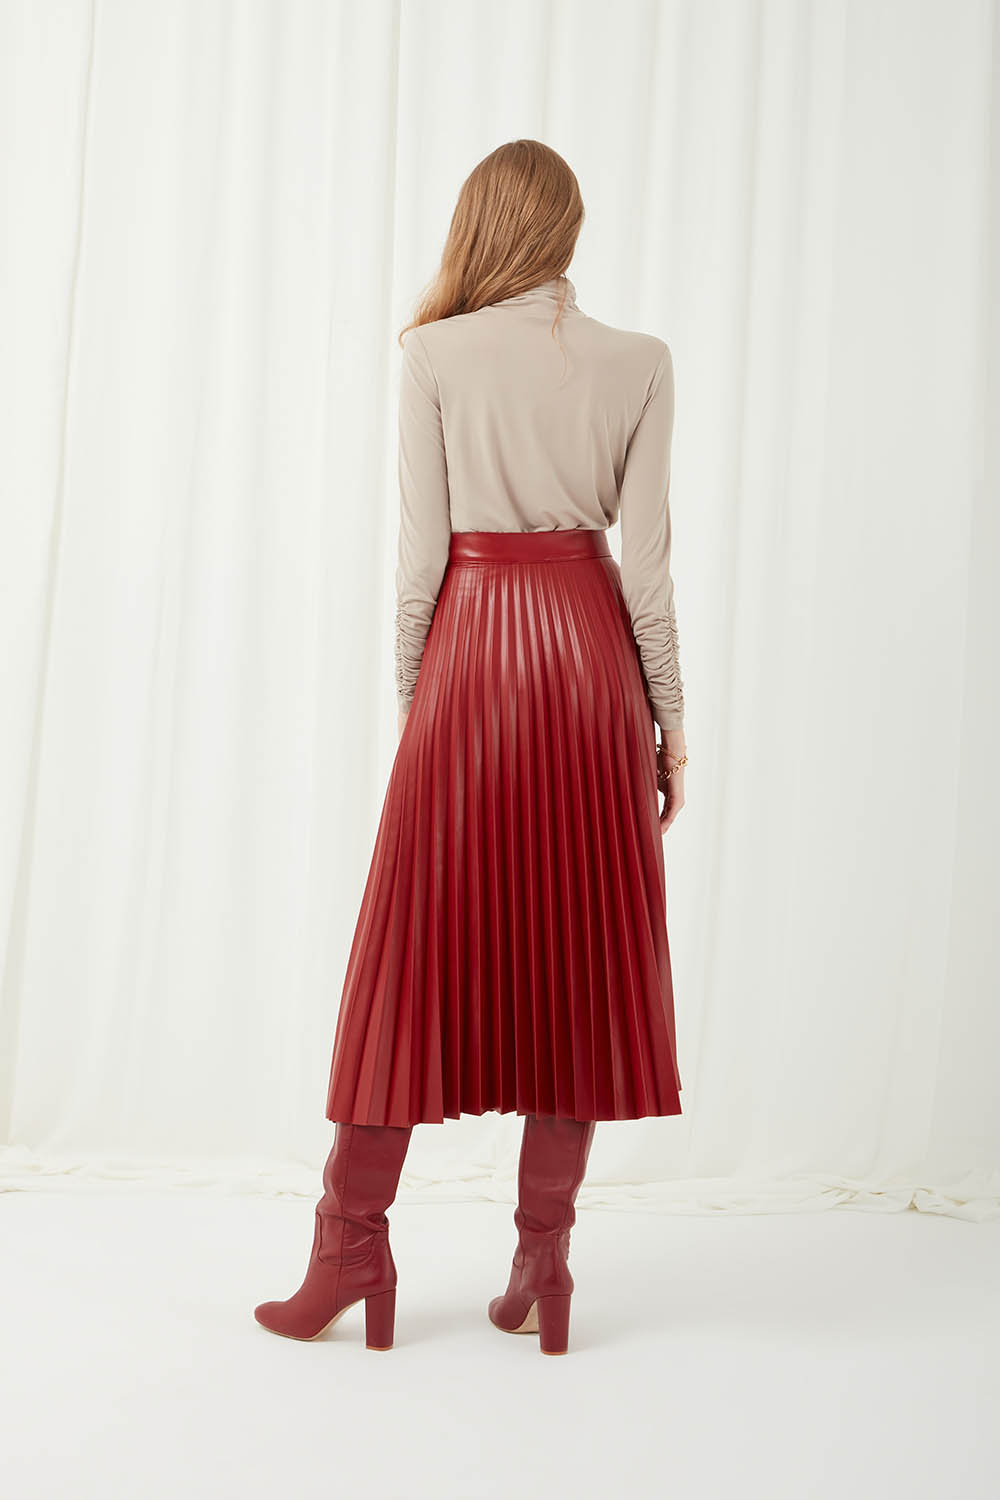 Faux Leather Burgundy Pleated Skirt